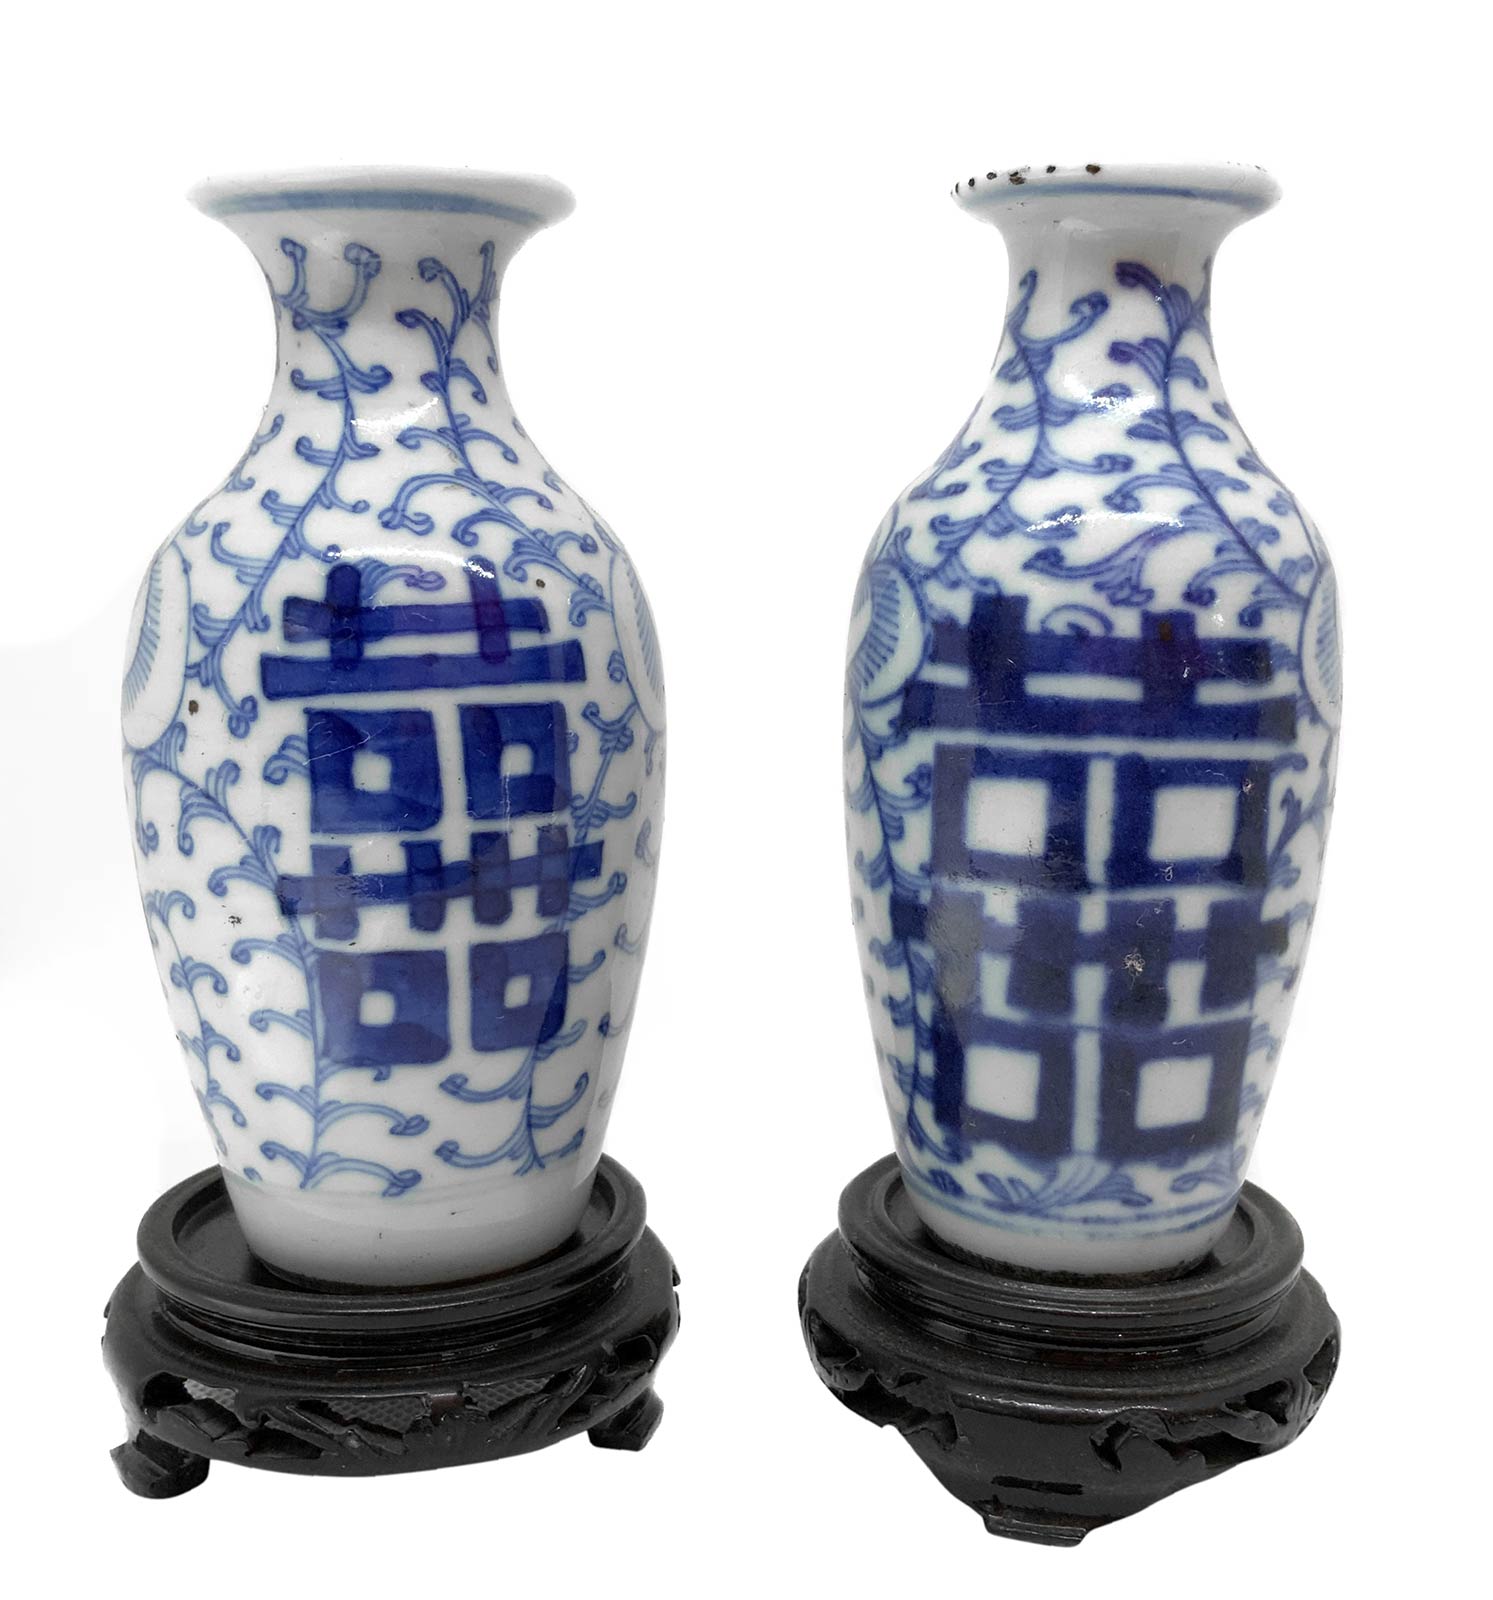 Pair of porcelain vases, China (Manchuria), XVII century. Wax seal on one of the vases. H cm 13.